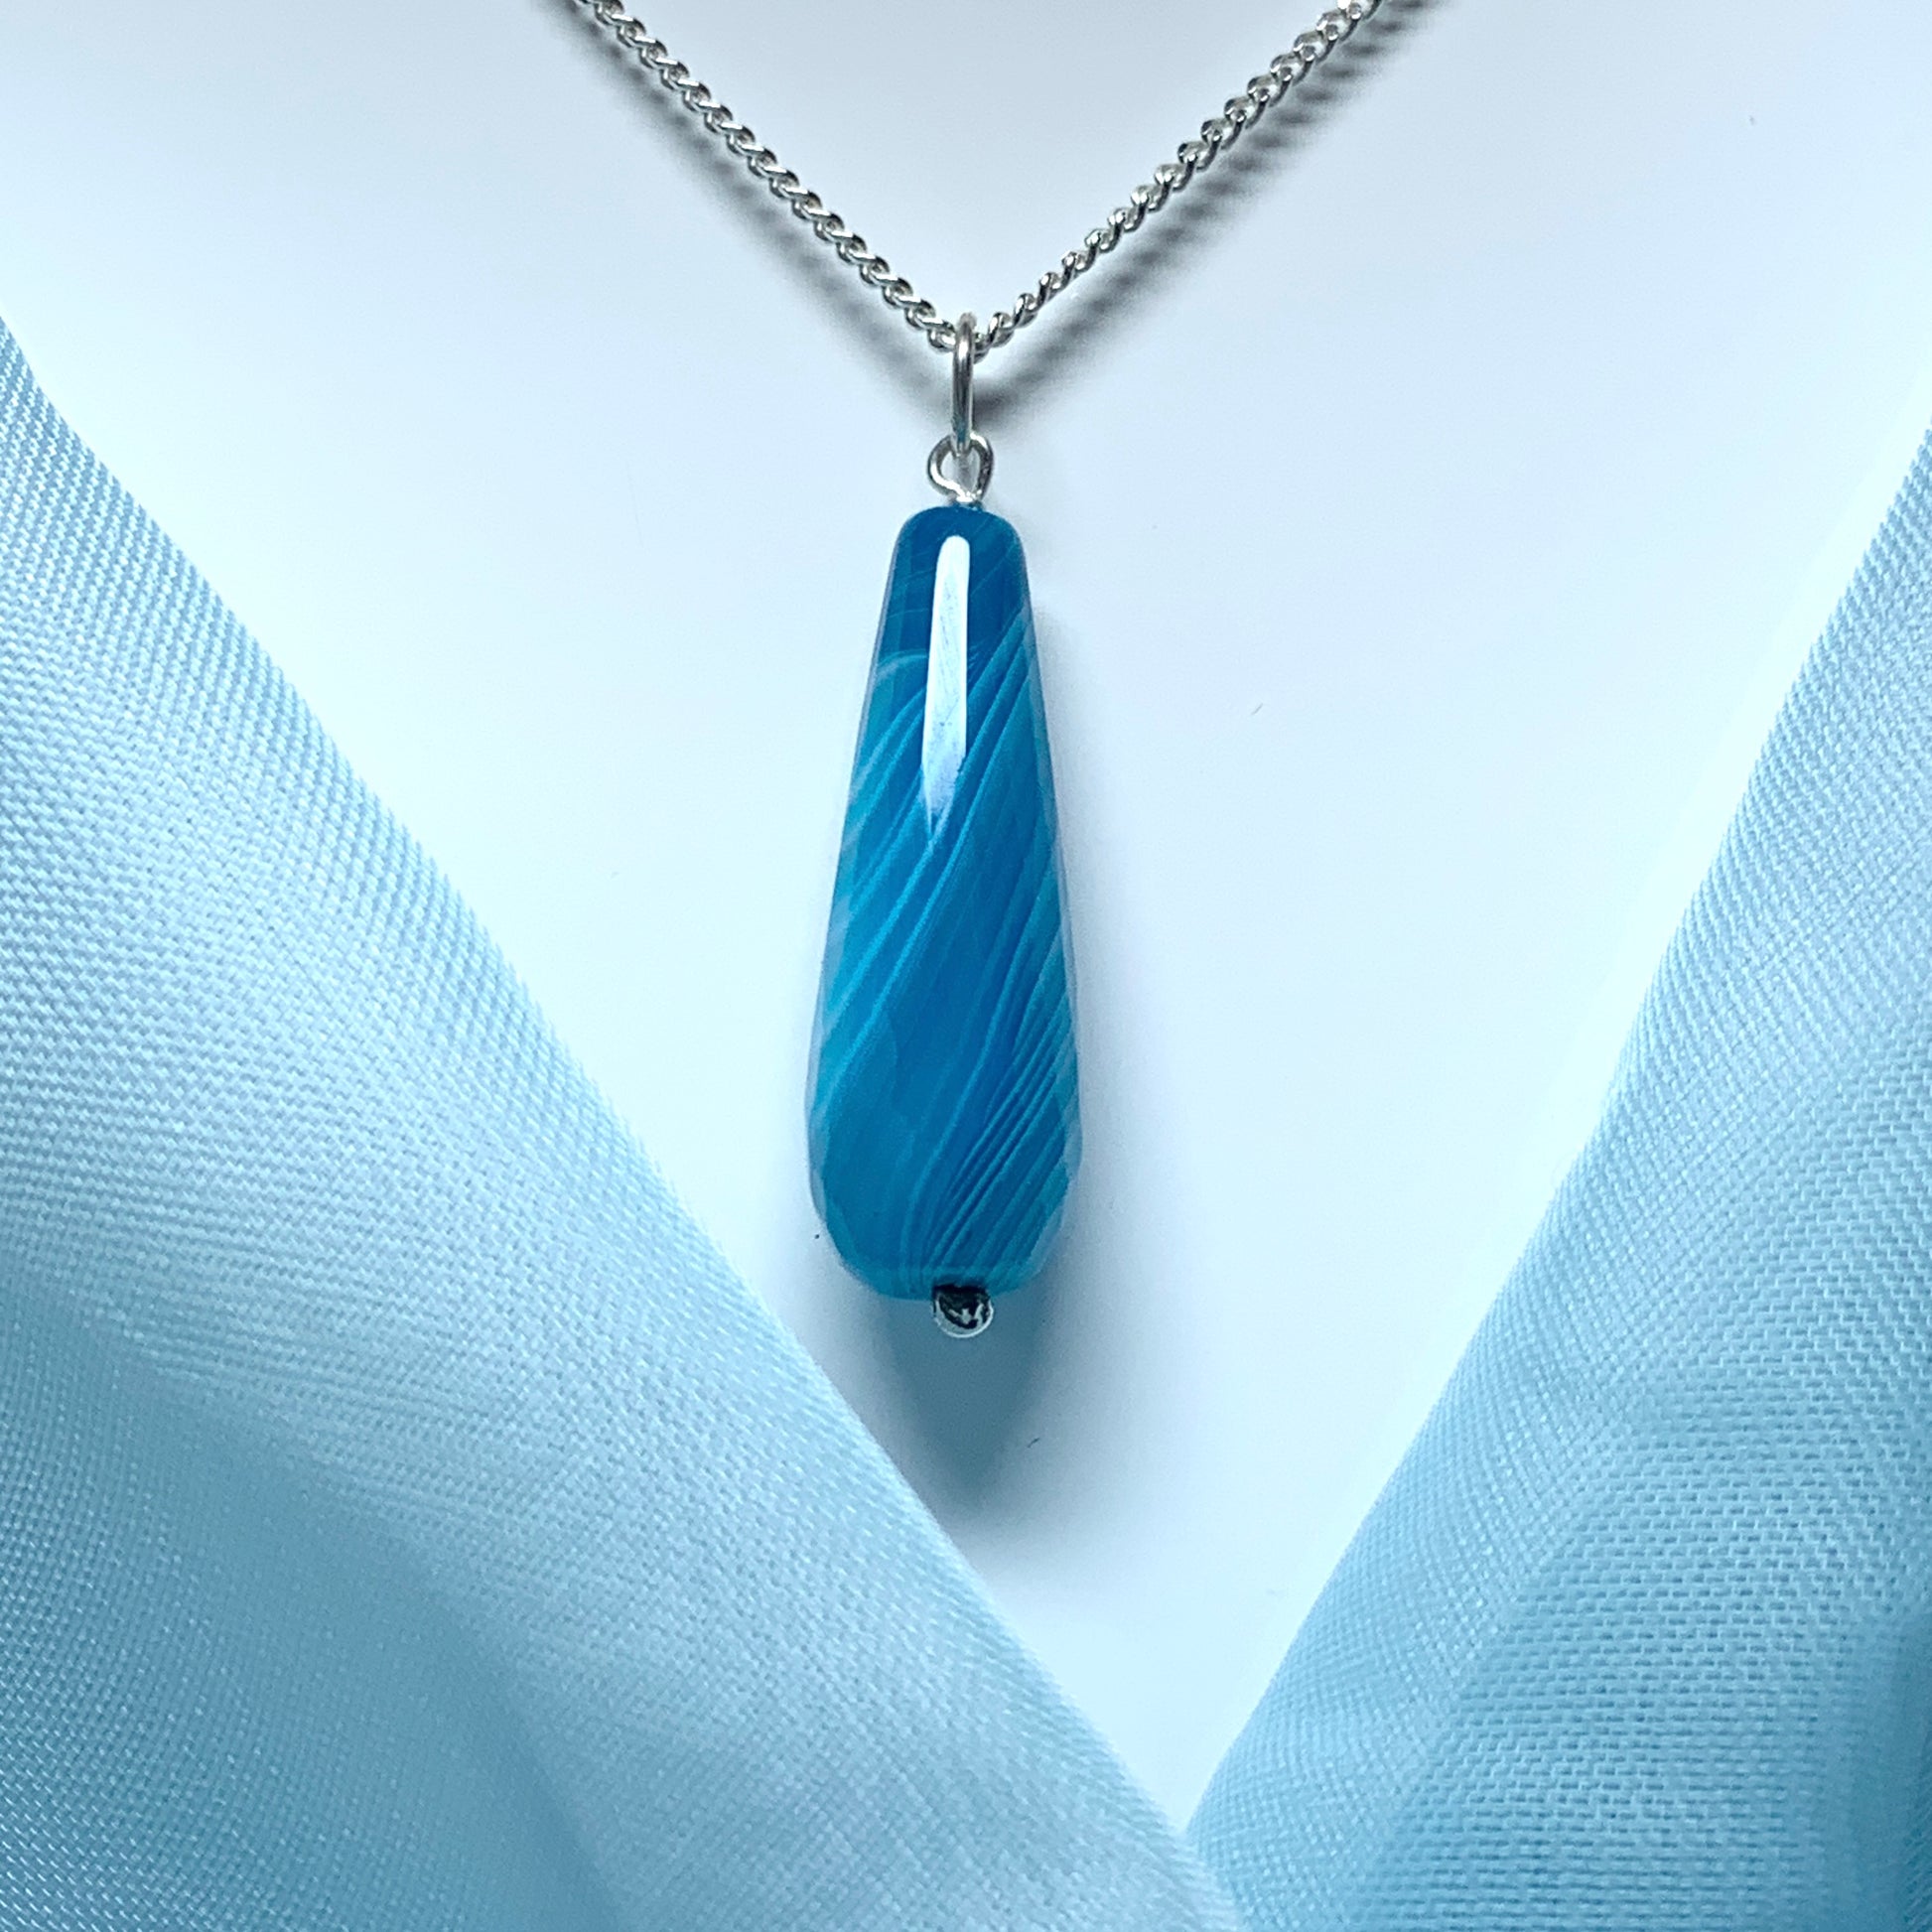 Real blue gate pear shaped teardrop necklace pendent sterling silver